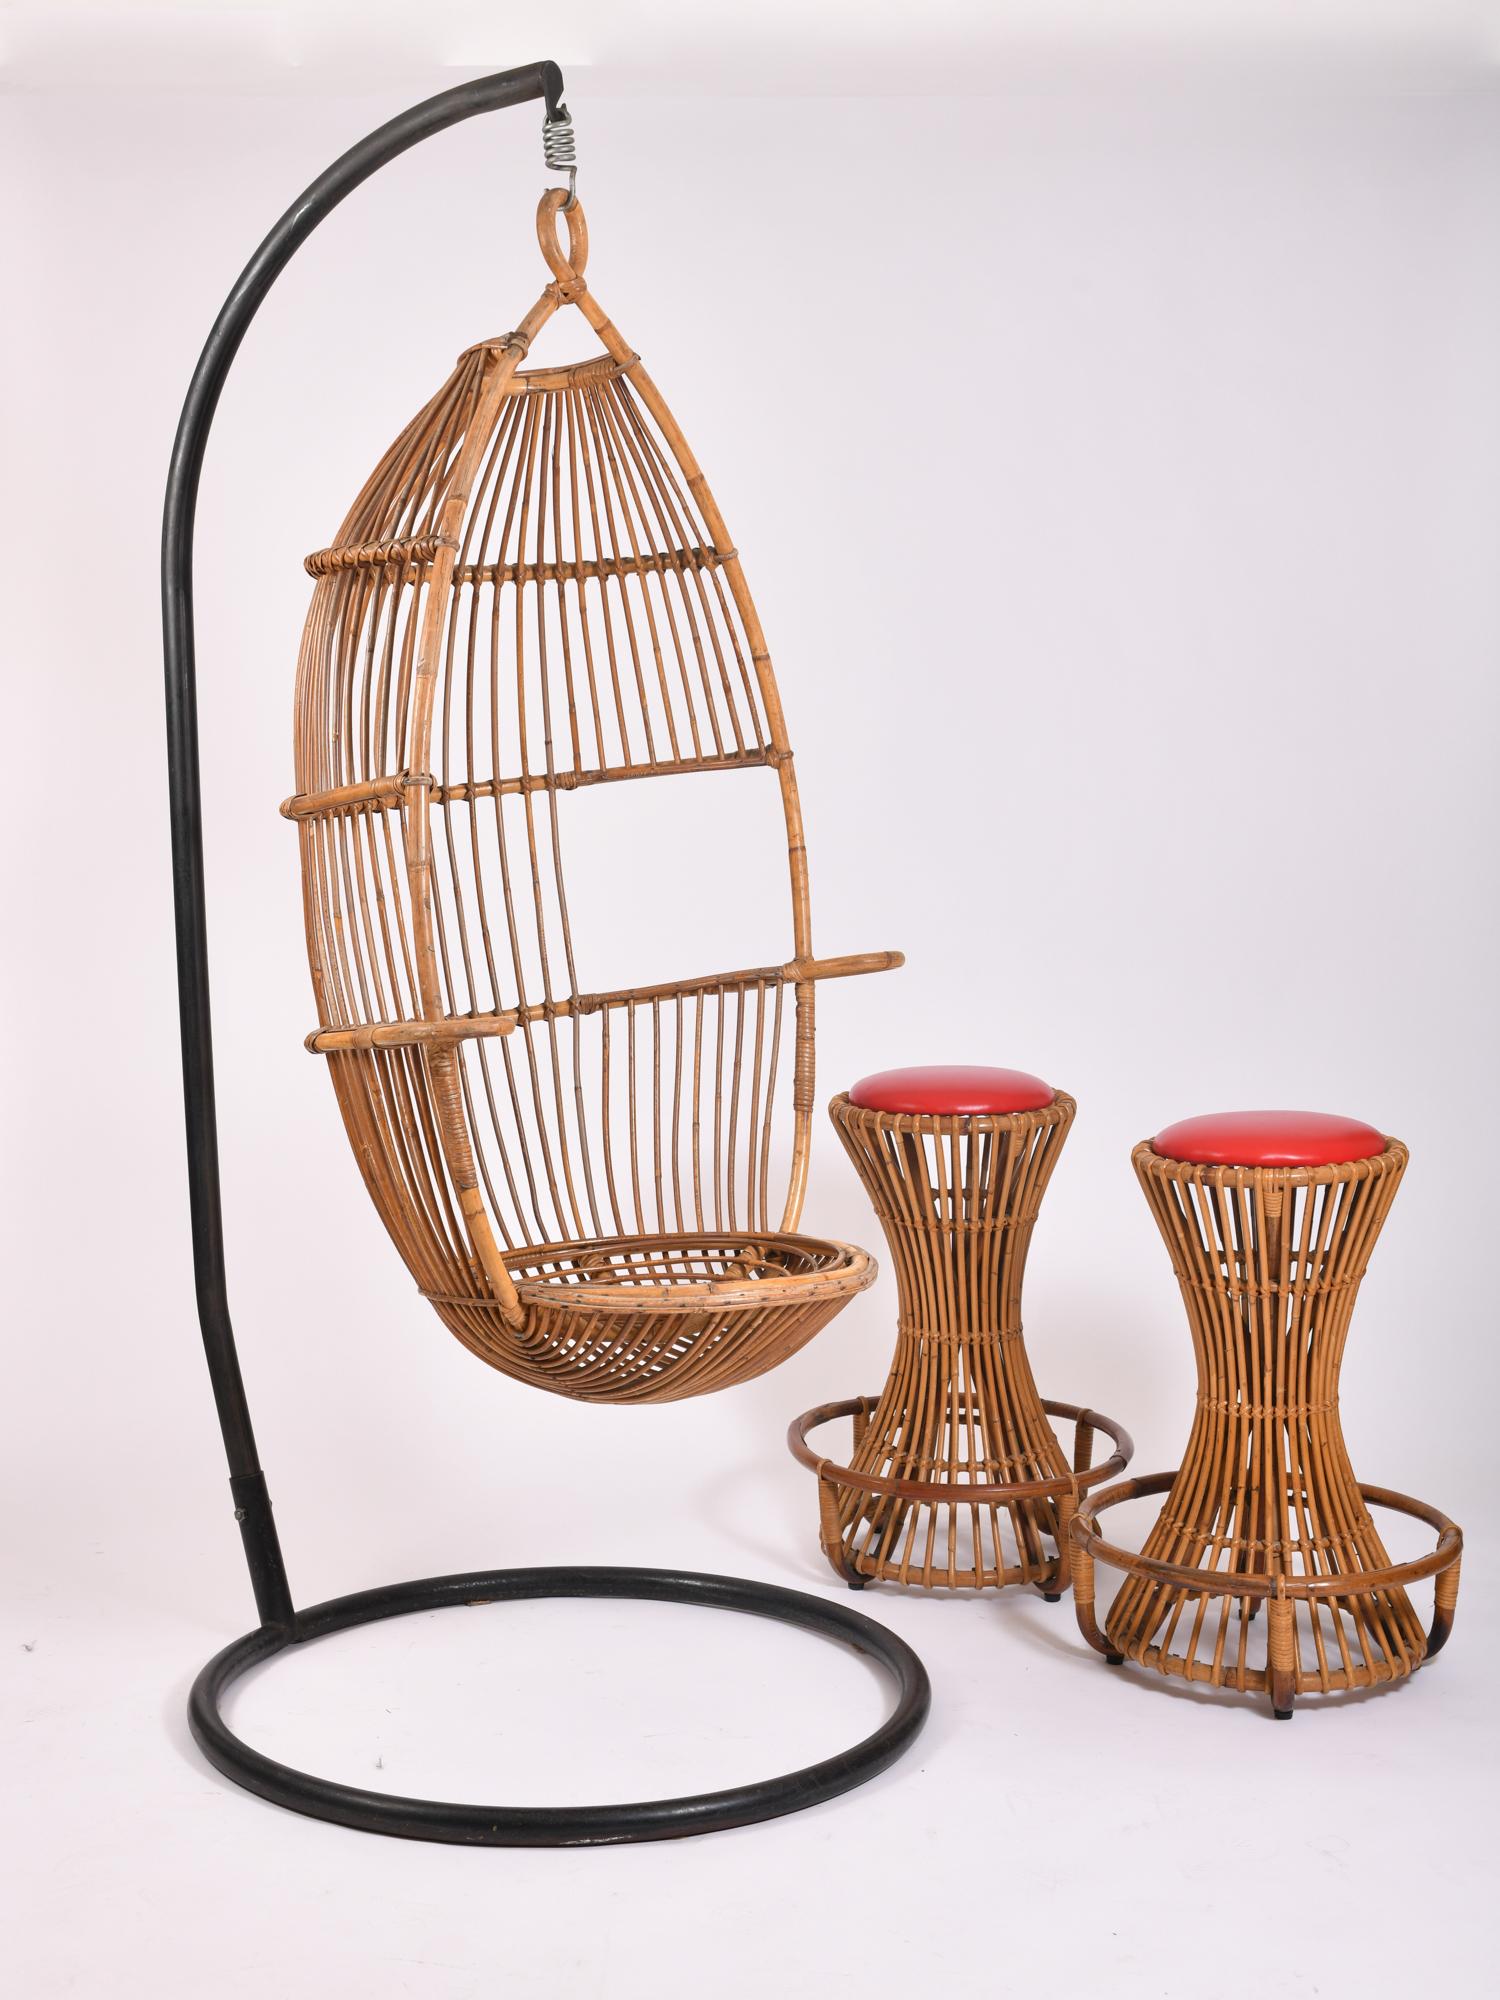 Bonacina rattan swing chair, circa 1960.

Incredibly comfortable and relaxing!! 

For indoor or outdoor use.